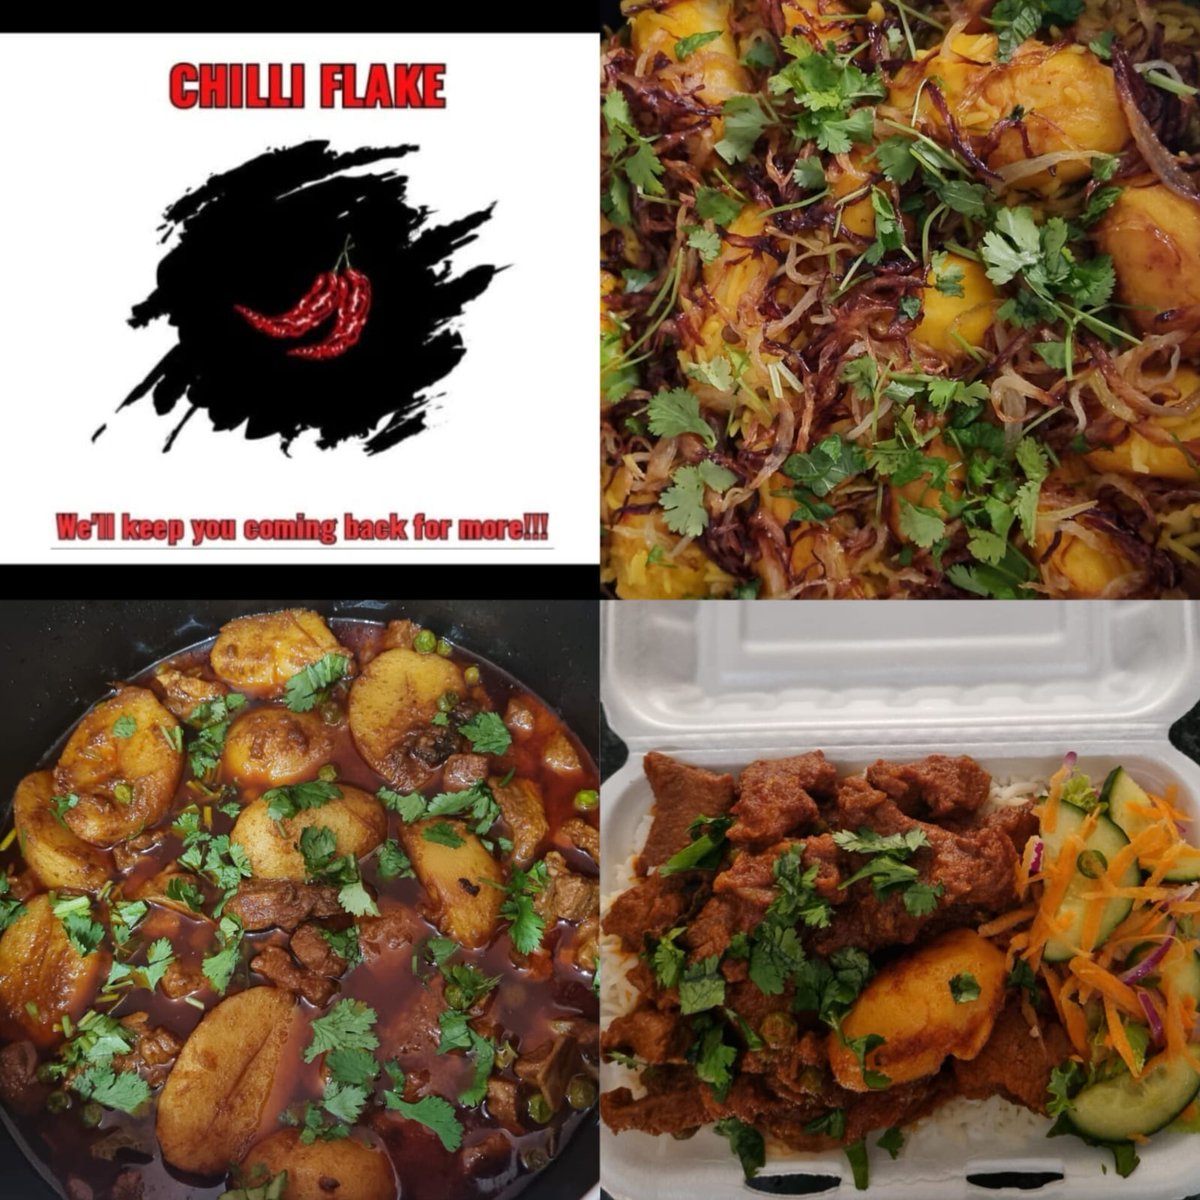 Jozi Fam please SAVE the date 1 JUNE for @indlovukazigar1 Sharlene will be feeding us with her authentic addictive Indian food 😋😍

+27 76 301 7200 to order her winter warmers🔥daily lunches also served 🥰

#AuntheticBunnyChows
#ChilliFlakeCatering 
#SmallBusinesses
#DJSBU